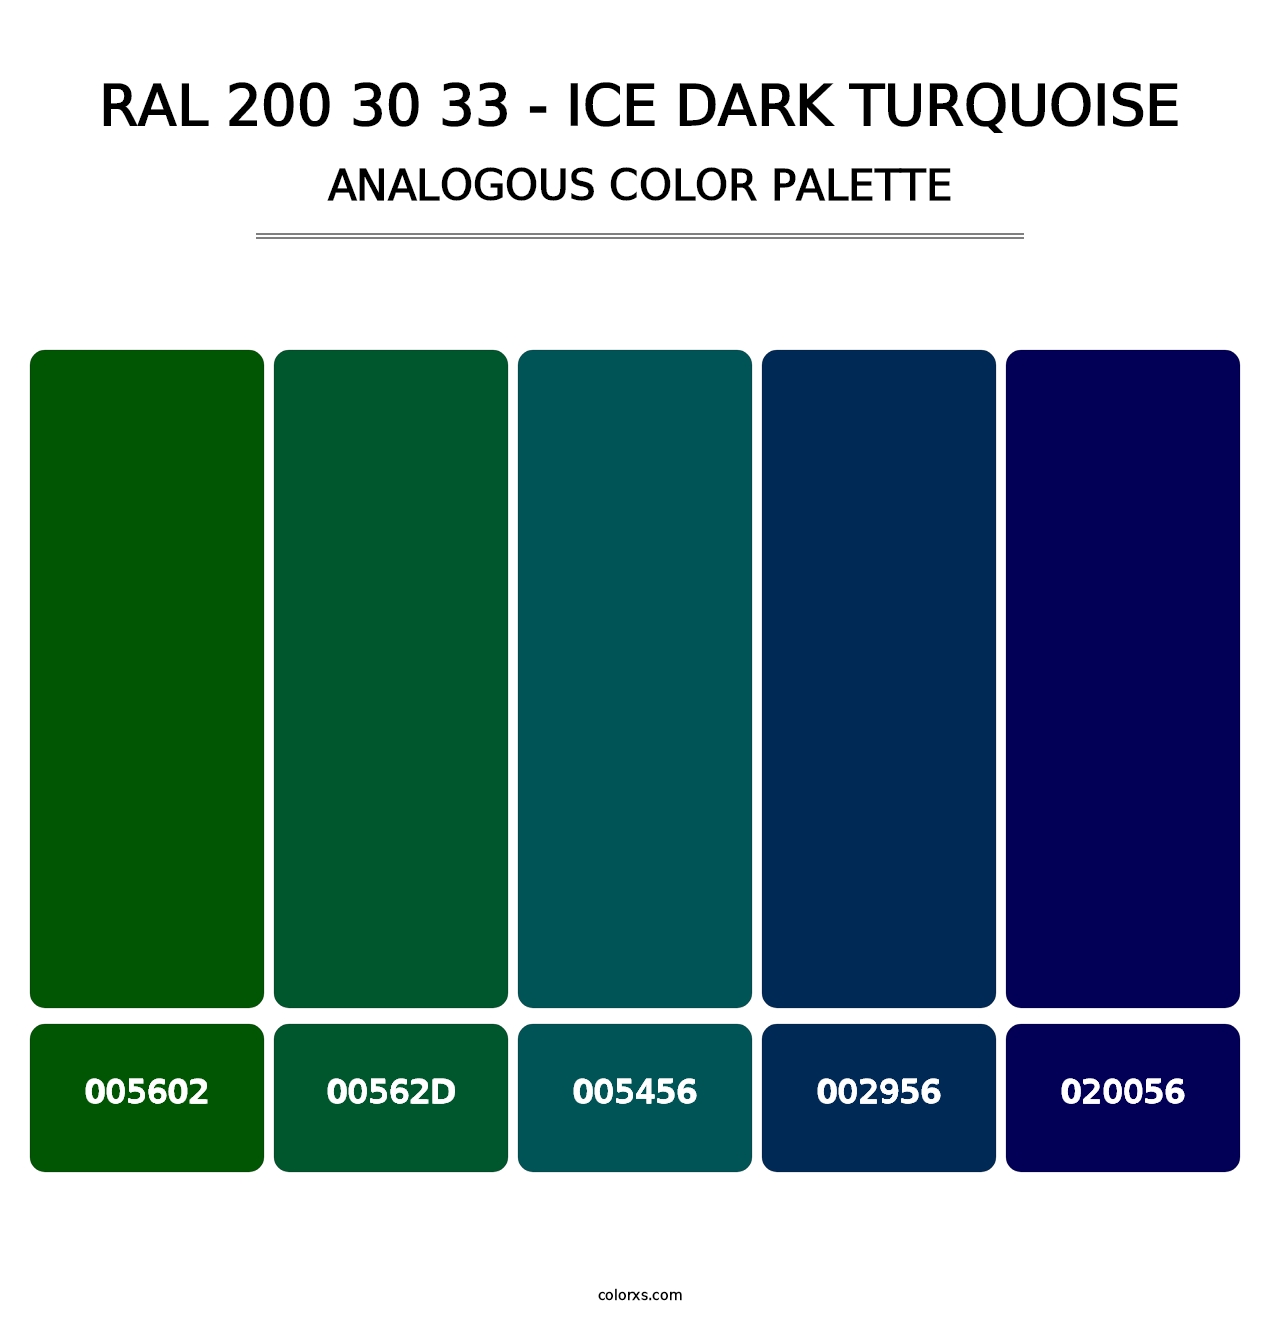 RAL 200 30 33 - Ice Dark Turquoise - Analogous Color Palette